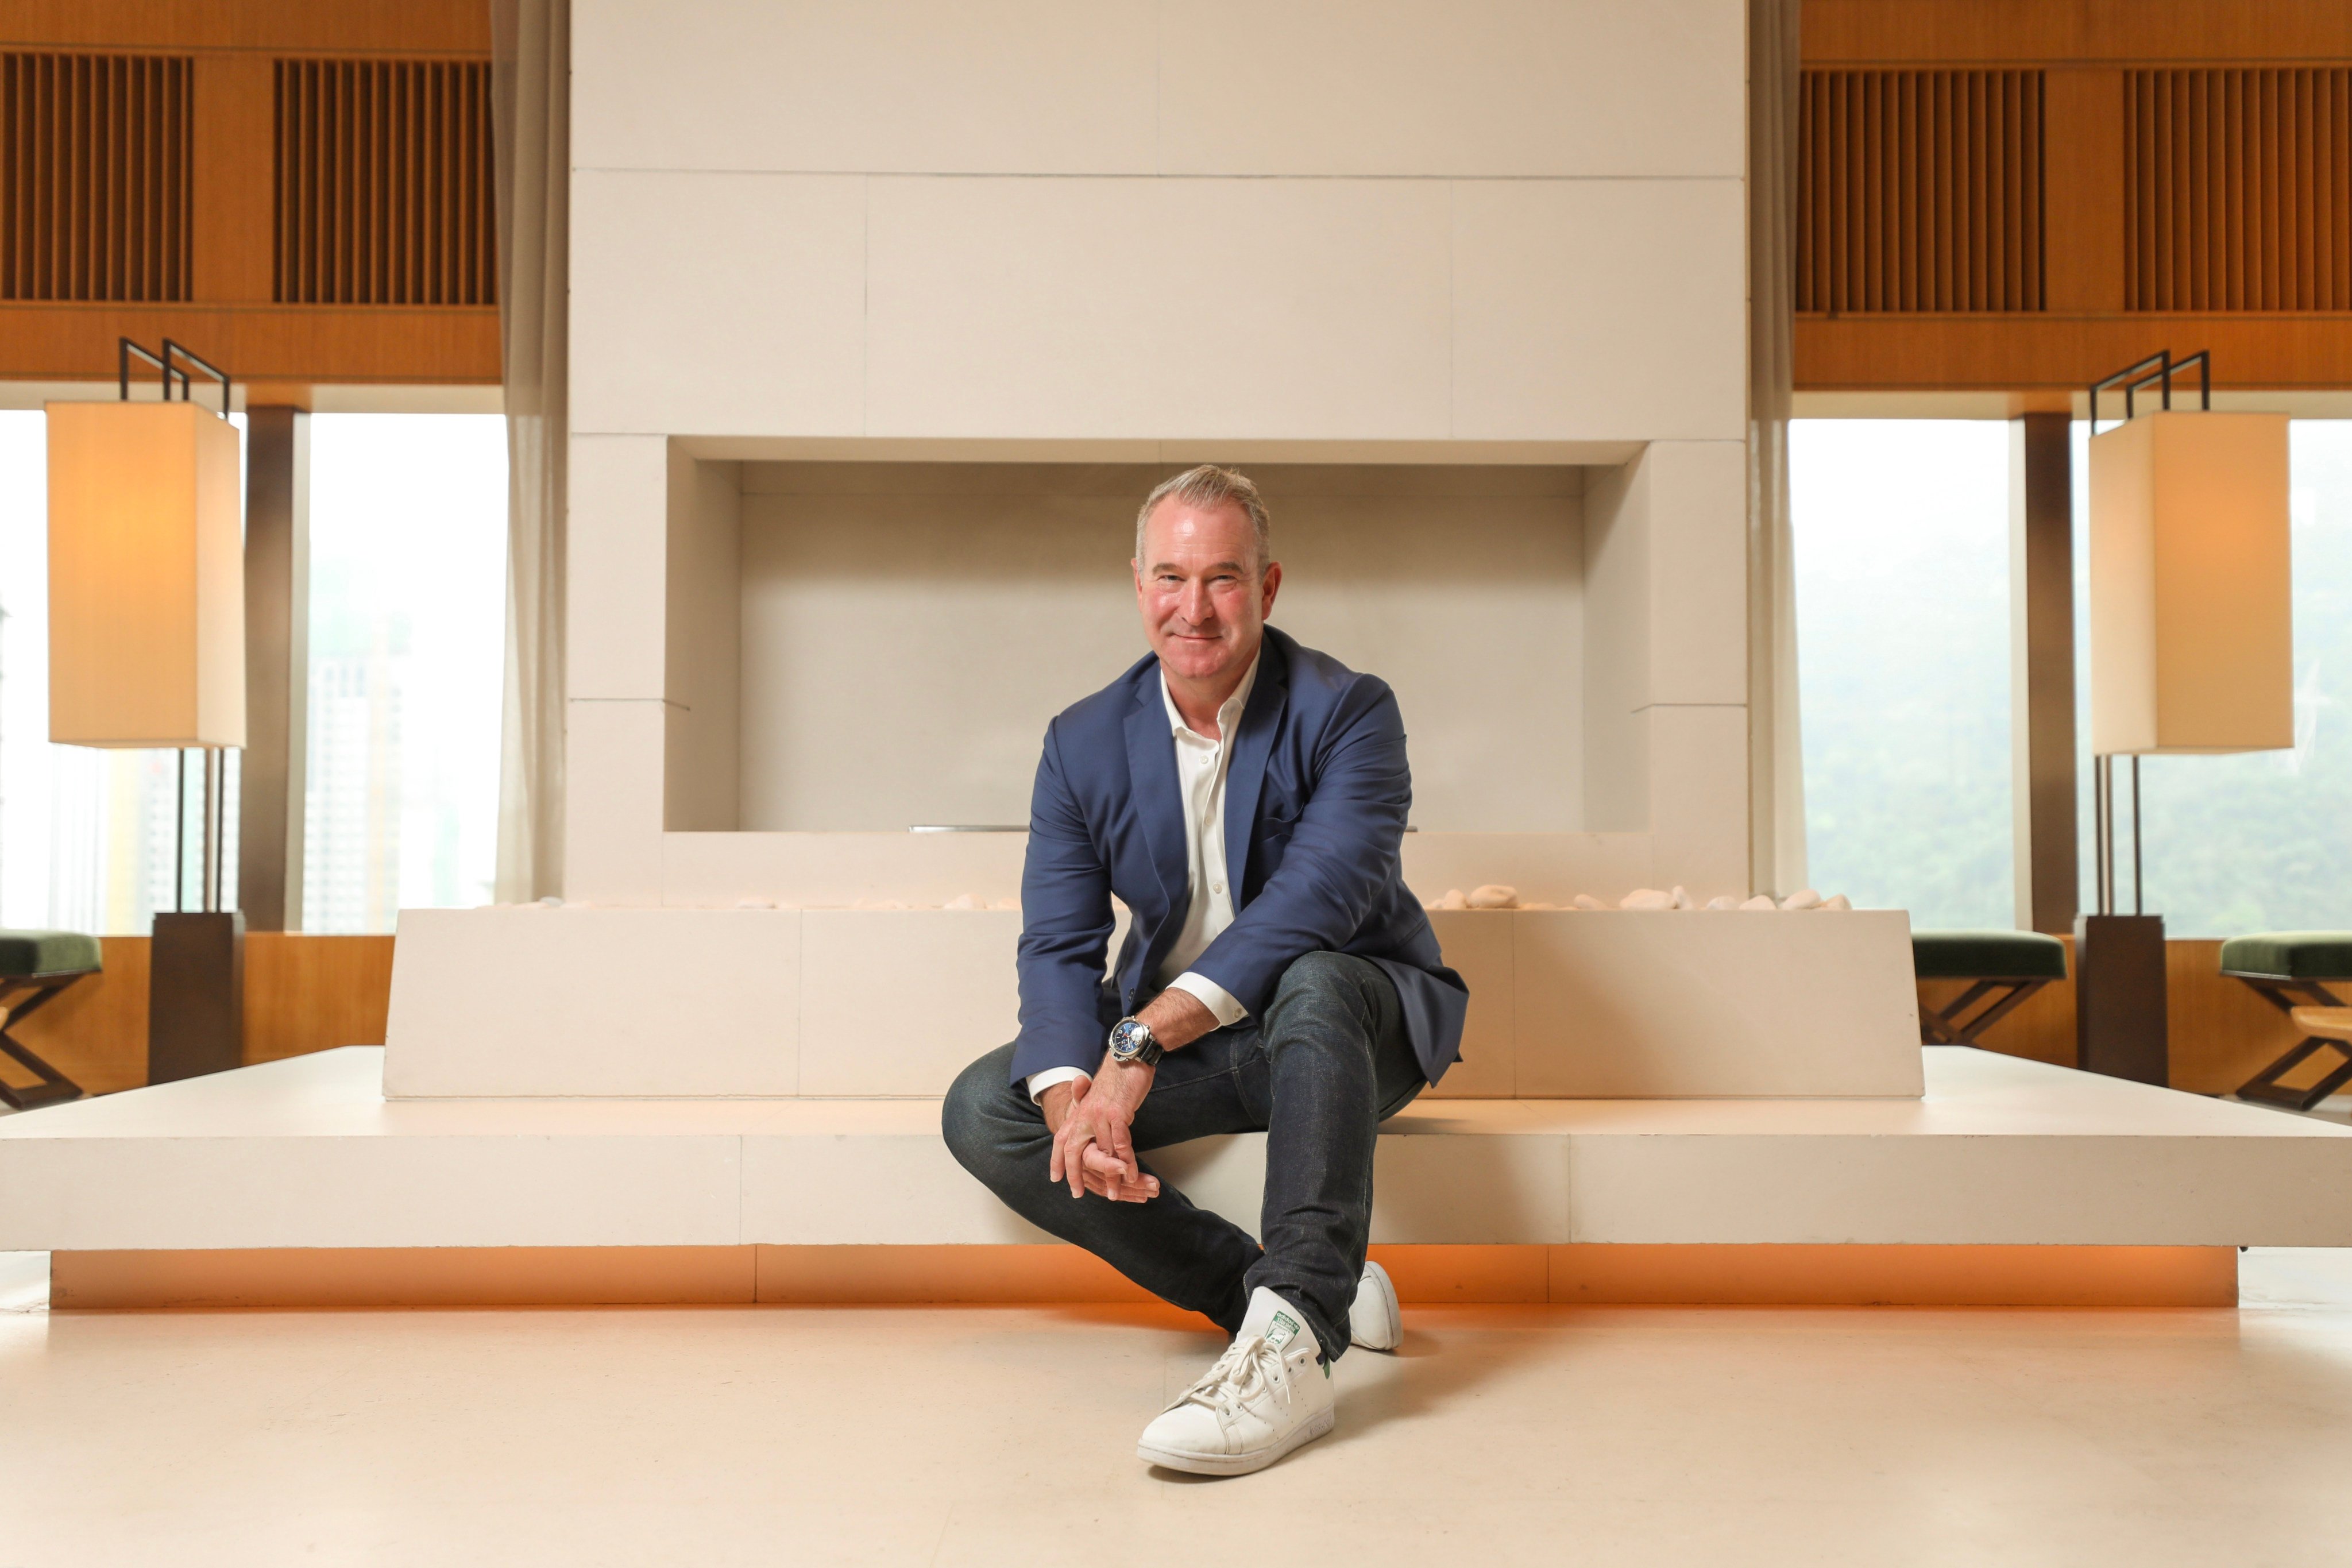 Todd Sears, the CEO and founder of Out Leadership, the global LGBTQ business network, talks to Fionnuala McHugh about play-acting, letter writing and open accounting. Photo: Xiaomei Chen